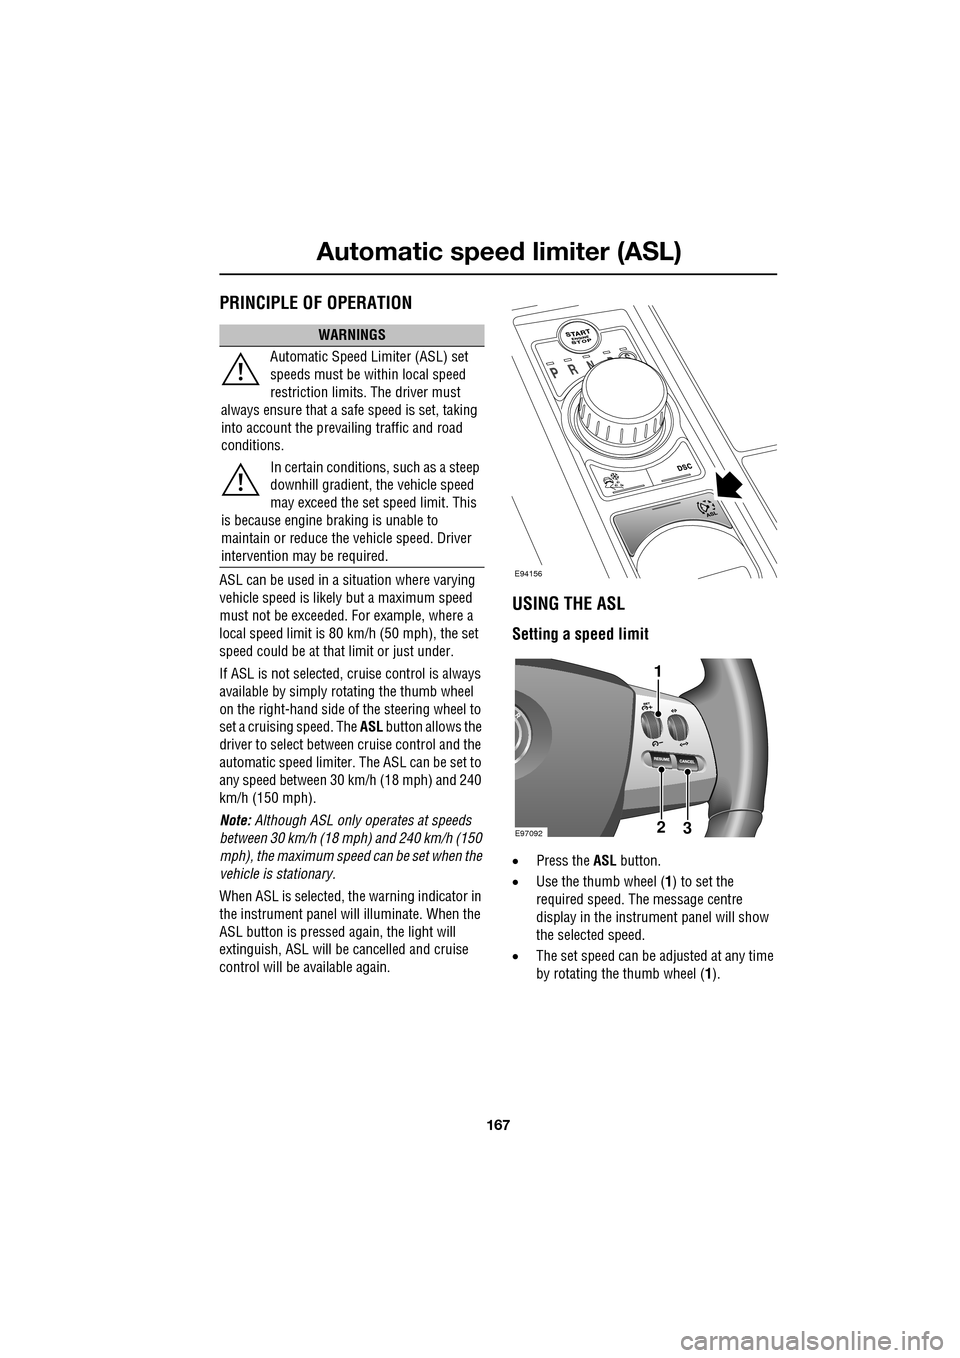 JAGUAR XF 2009 1.G Owners Manual 167
Automatic speed limiter (ASL)
               
     PRINCIPLE OF OPERATION
ASL can be used in a situation where varying 
vehicle speed is likely but a maximum speed 
must not be exceeded. For examp